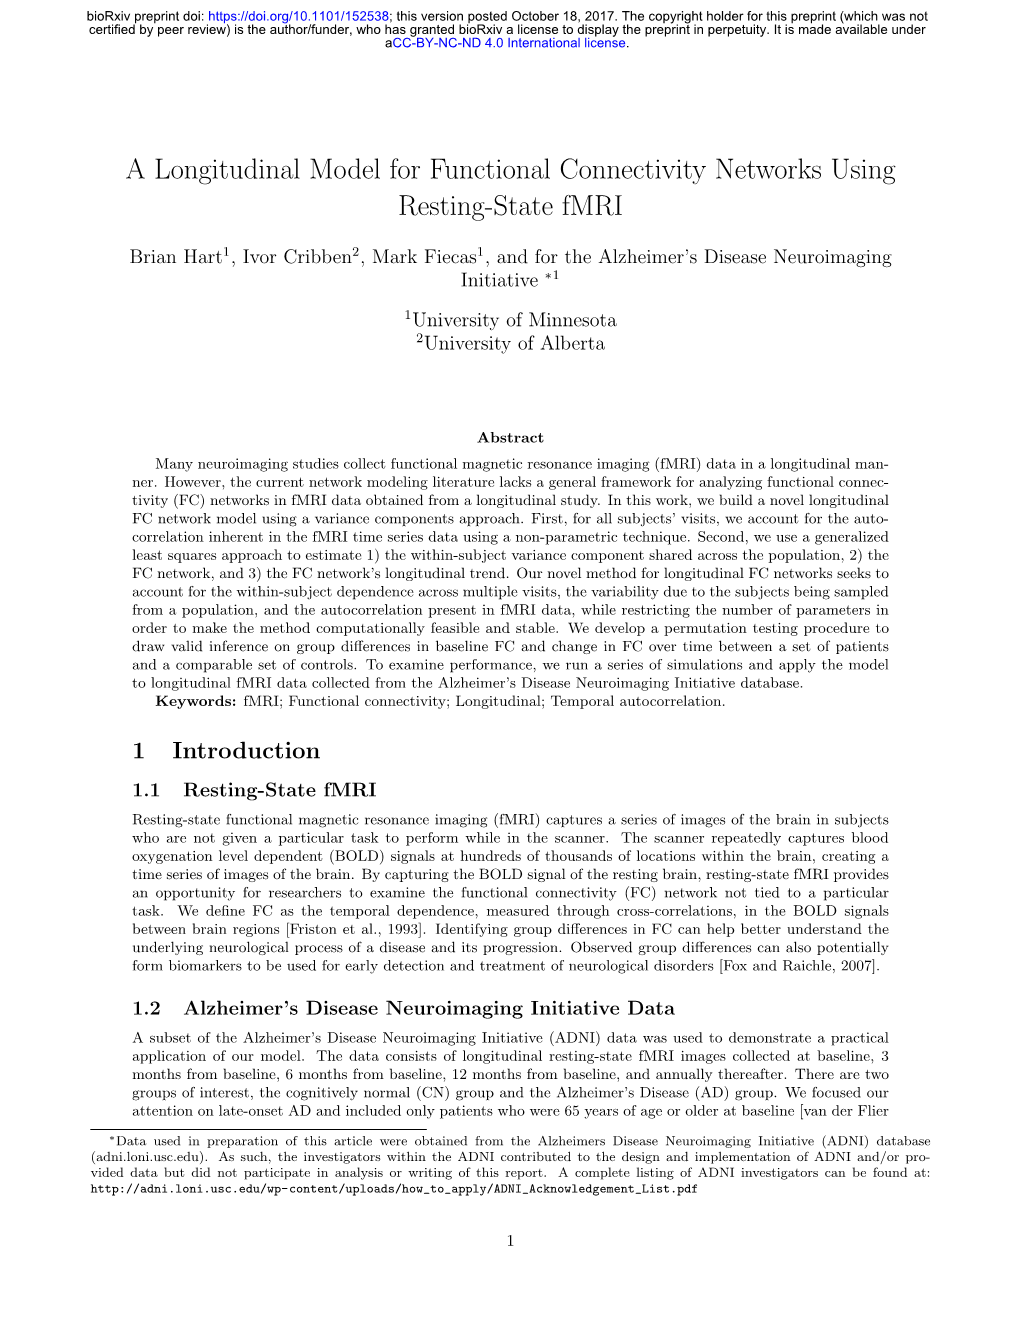 A Longitudinal Model for Functional Connectivity Networks Using Resting-State Fmri